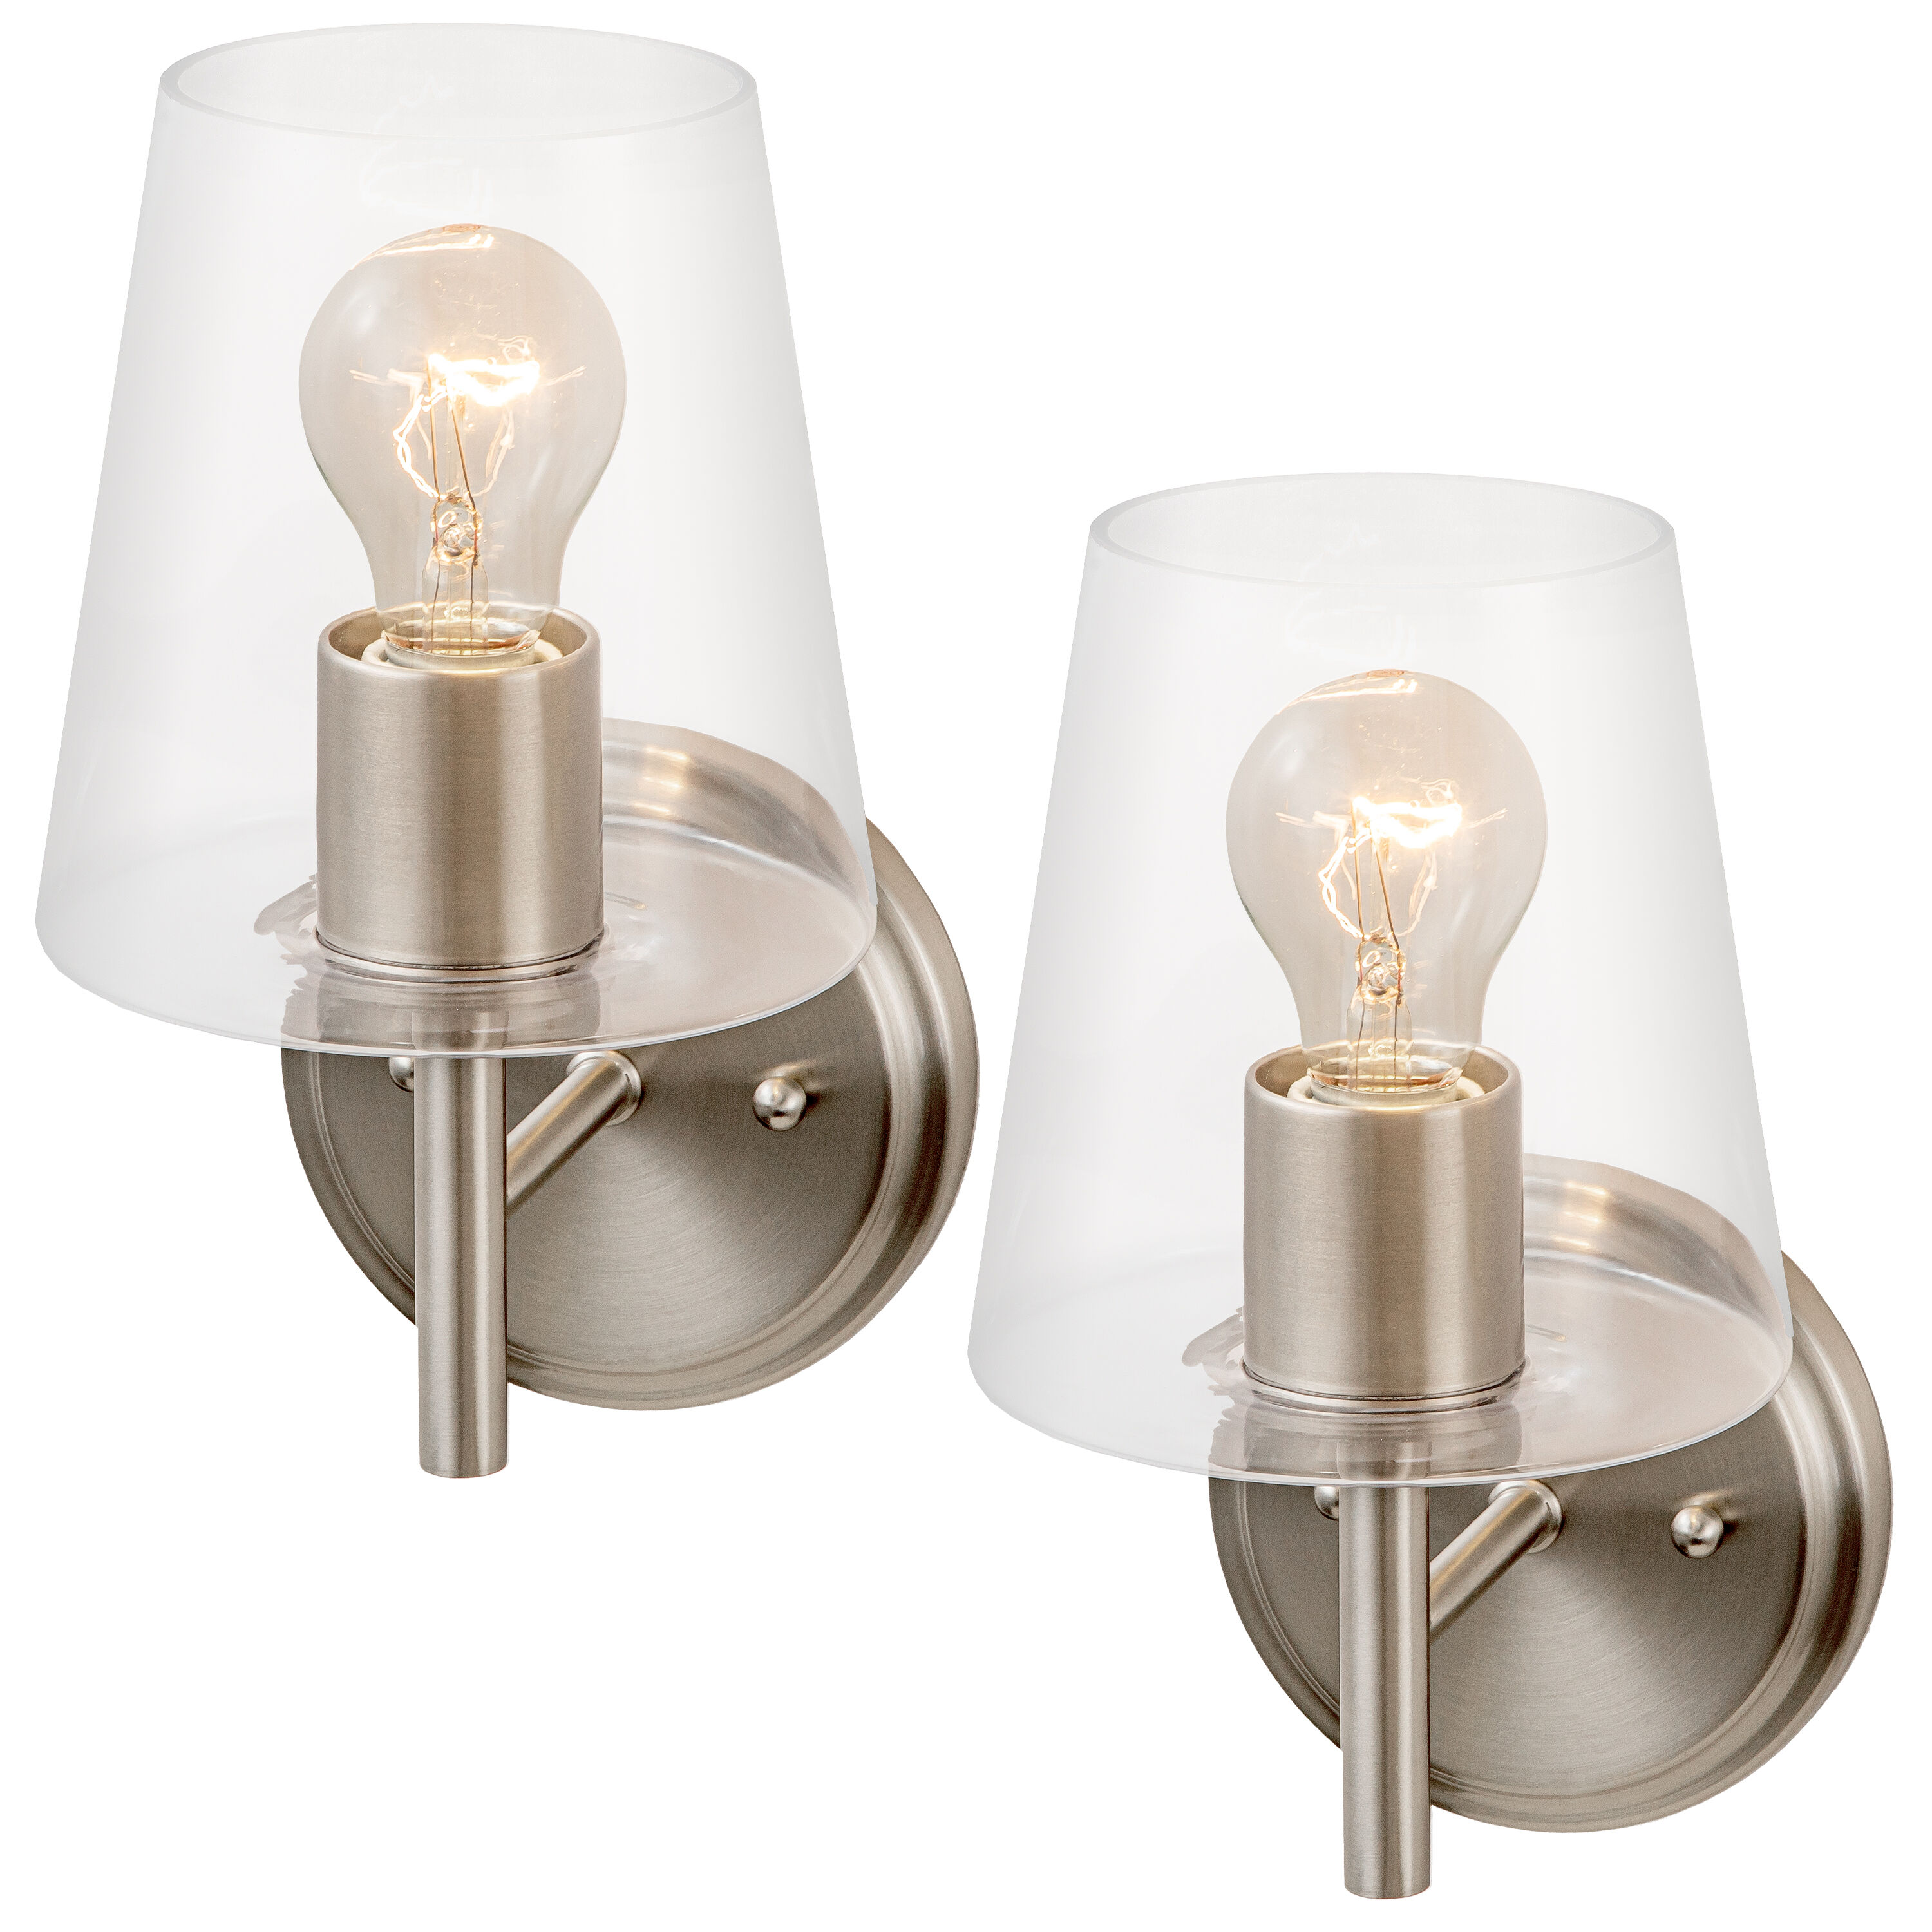 C Cattleya Brushed Nickel Armed Sconce Wall Lamp at Lowes.com